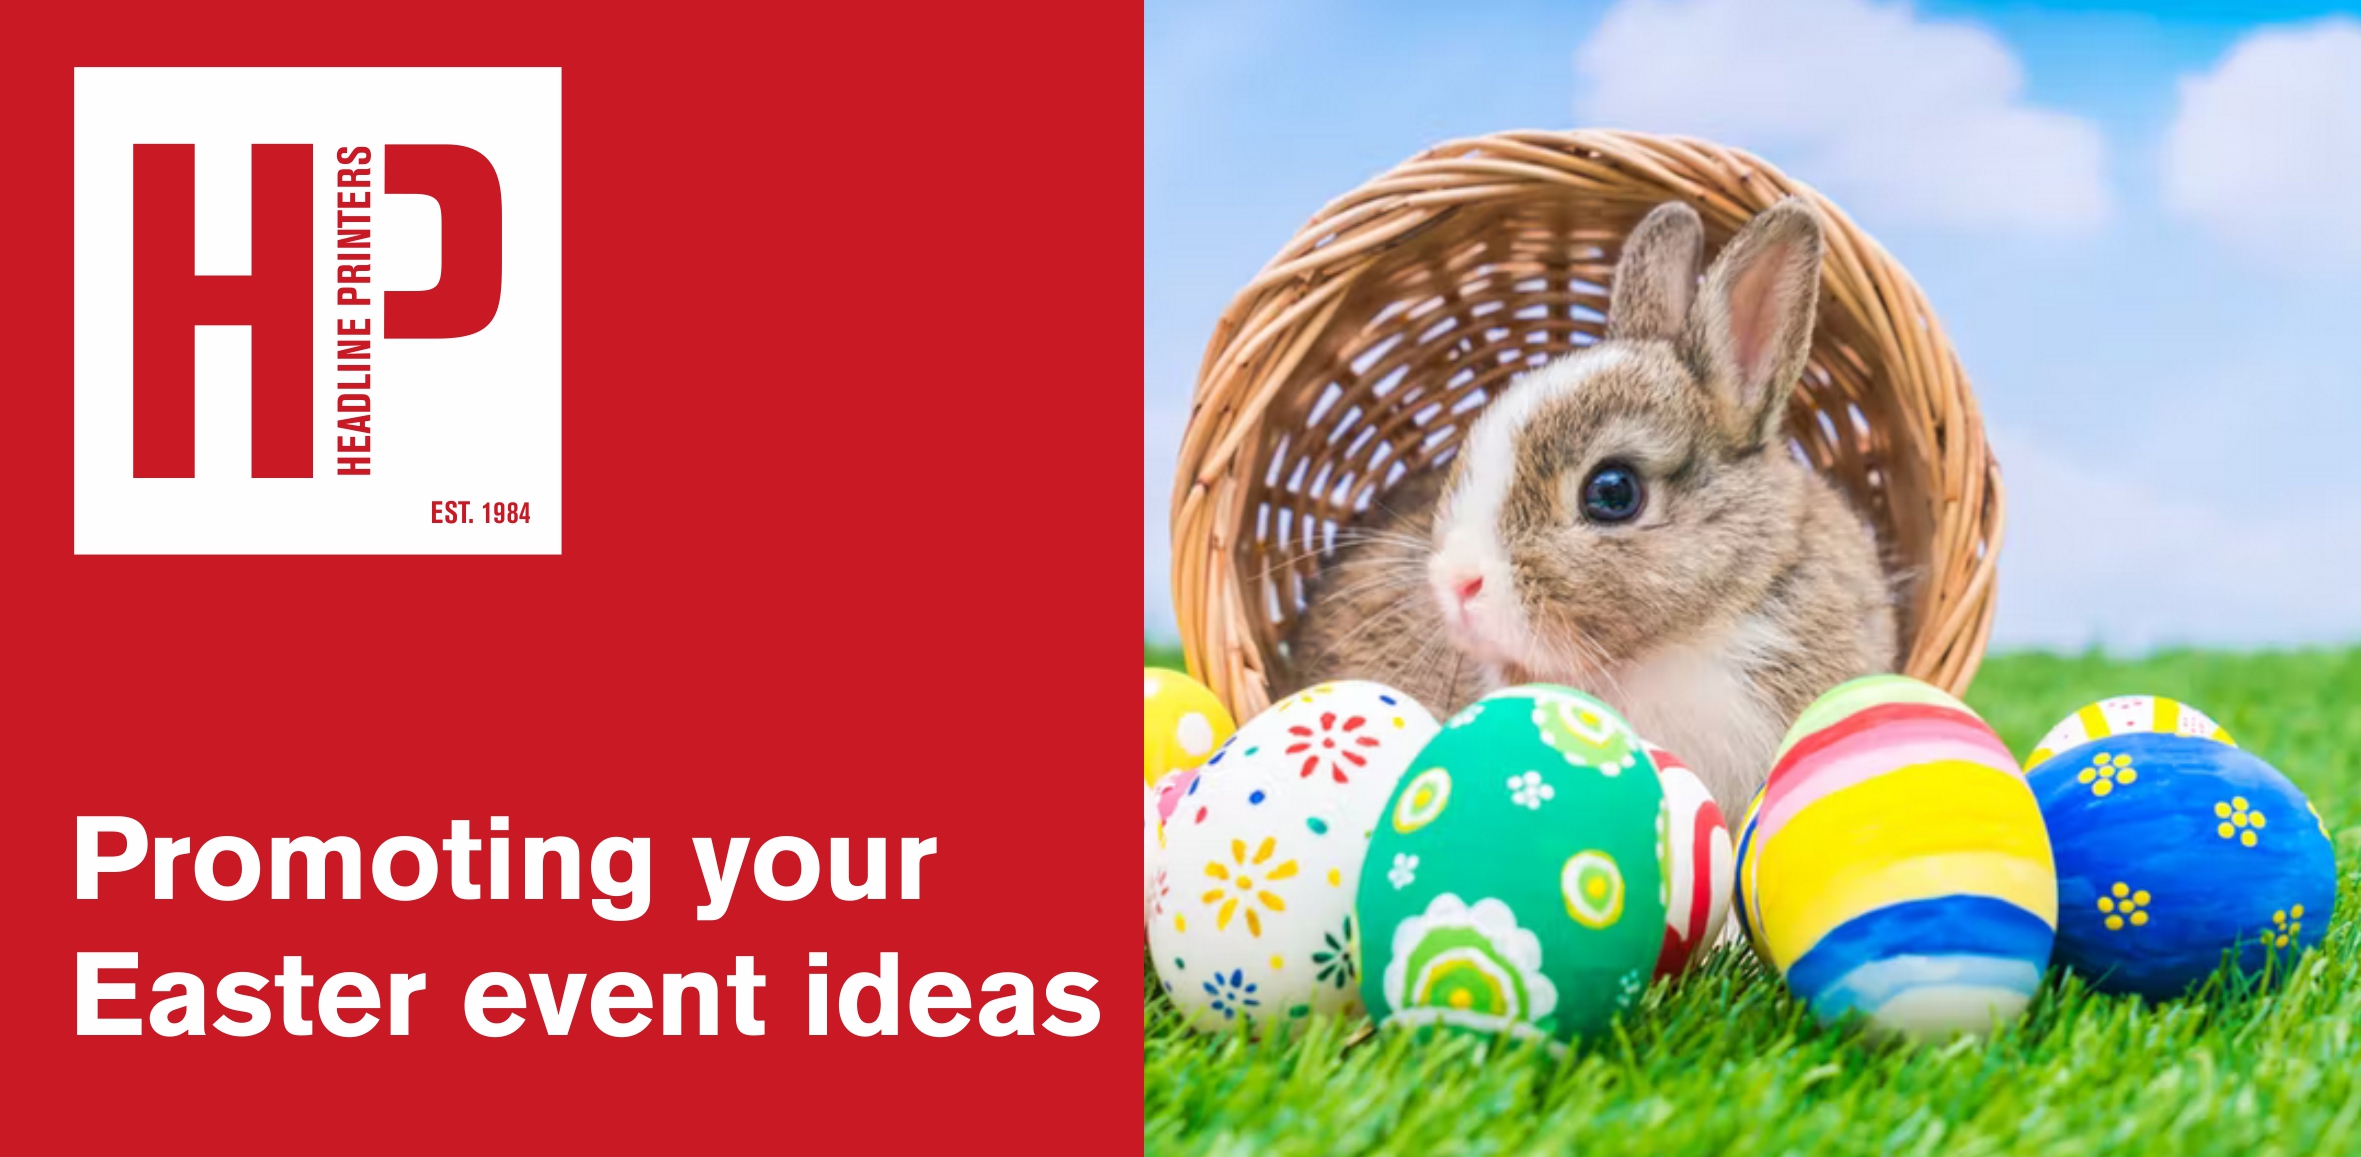 Promoting your Easter event ideas